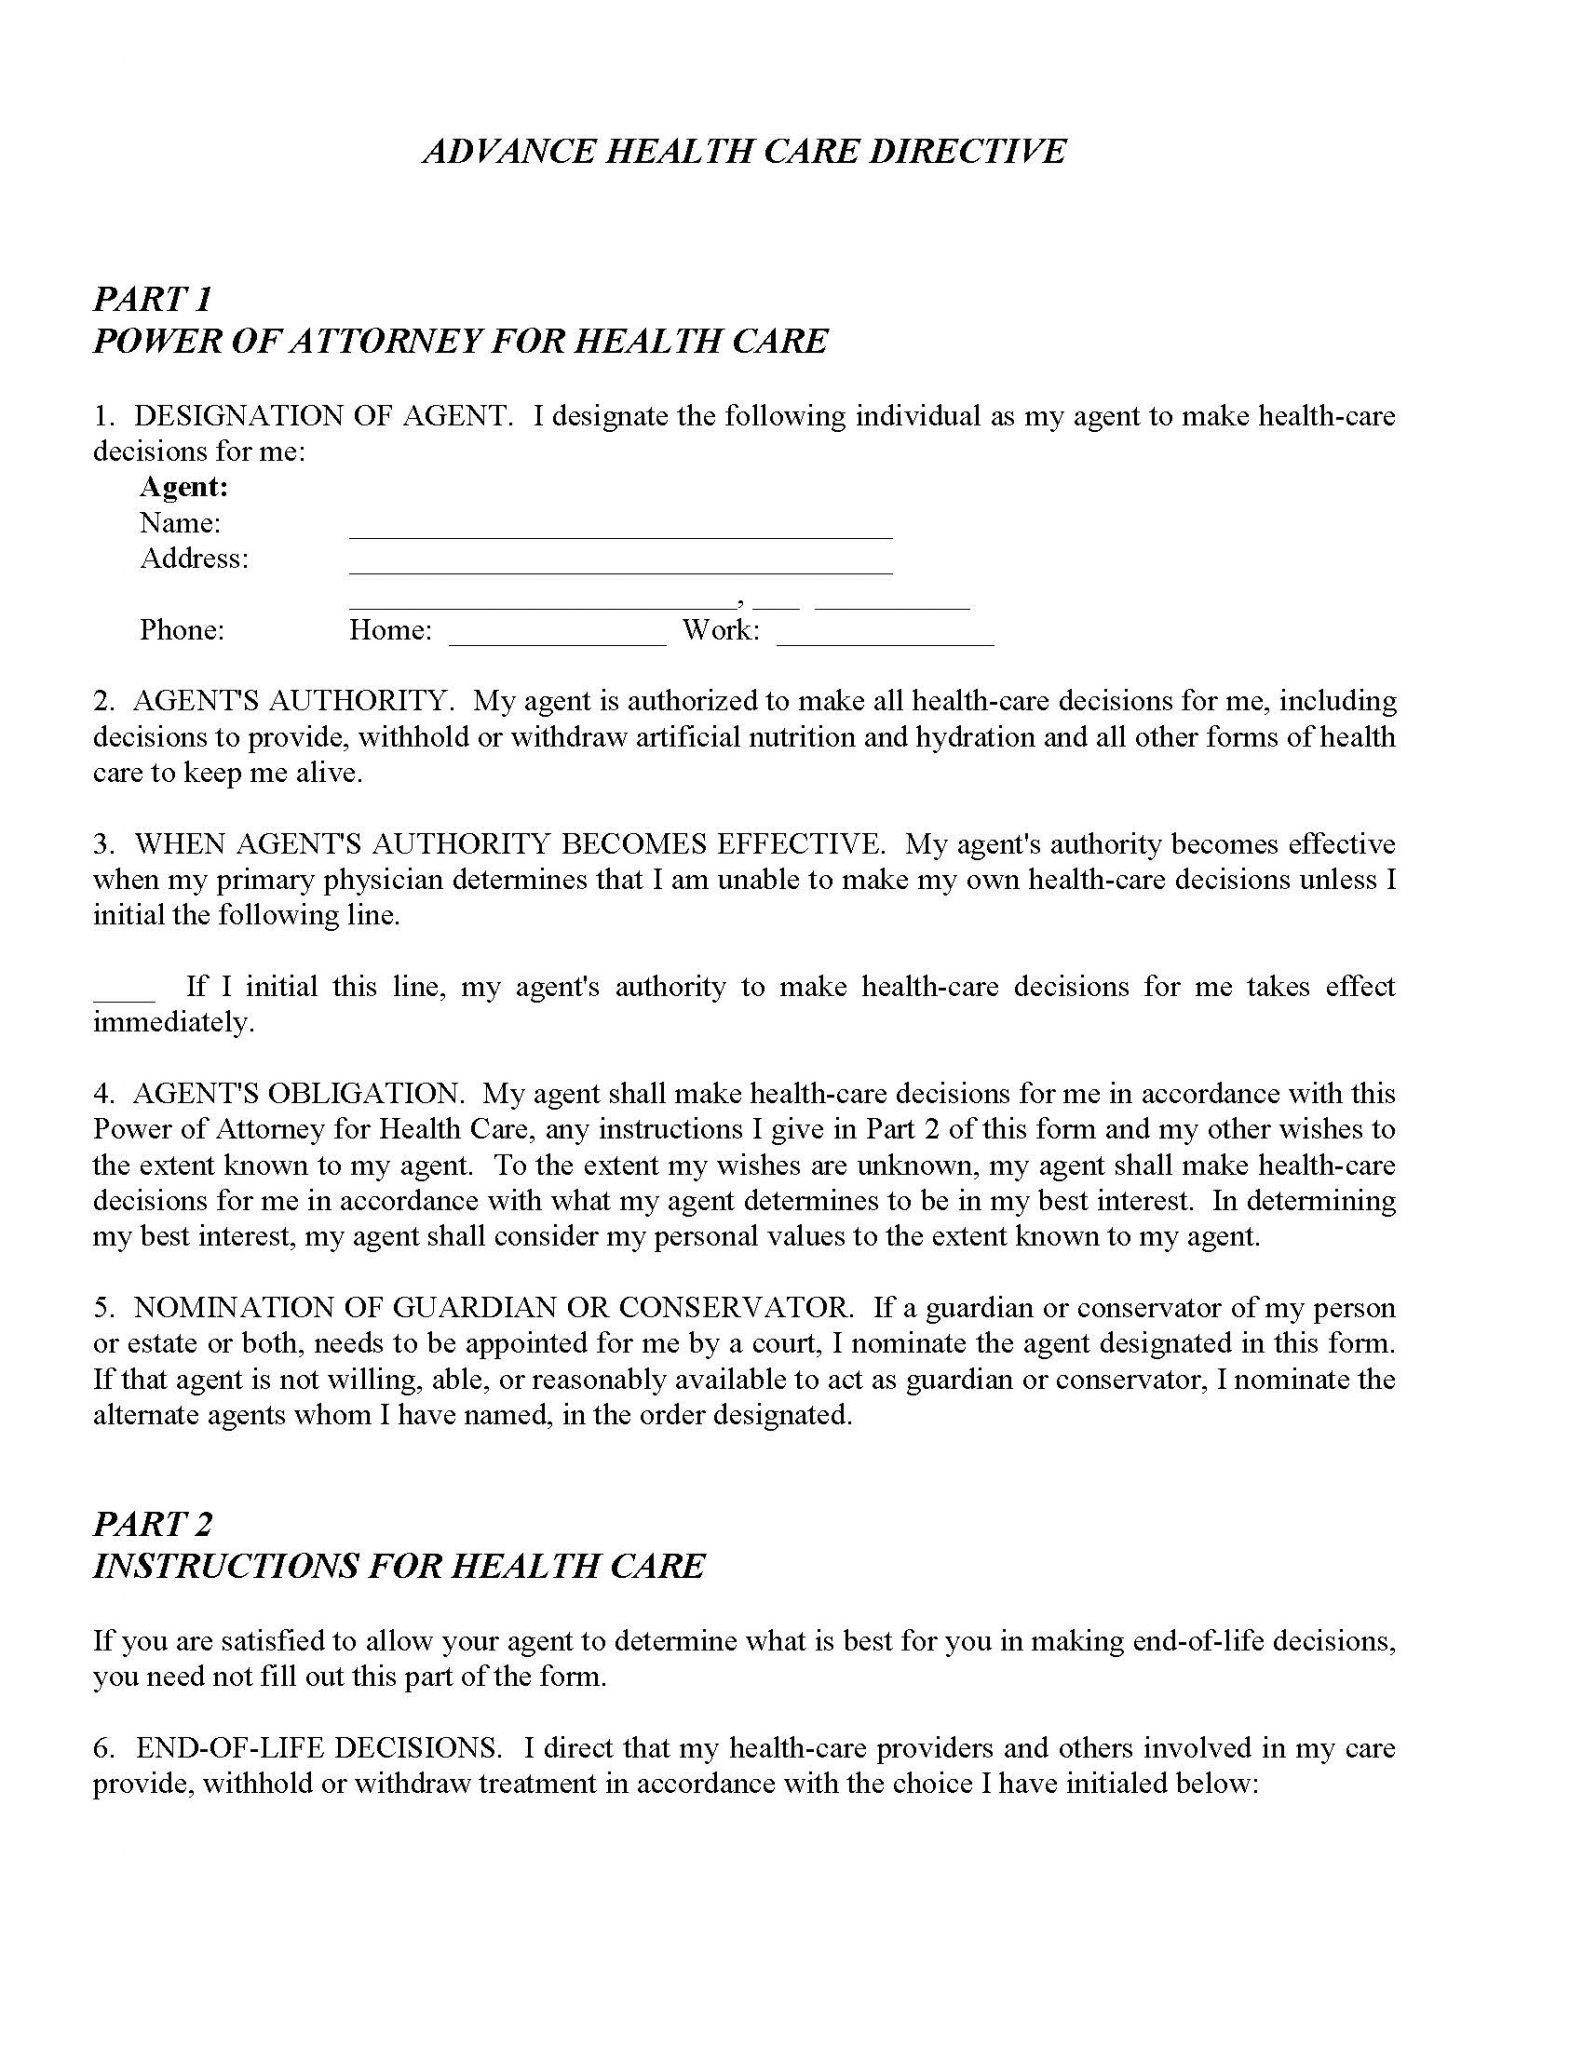 Medical Power of Attorney Word Free Printable Legal Forms